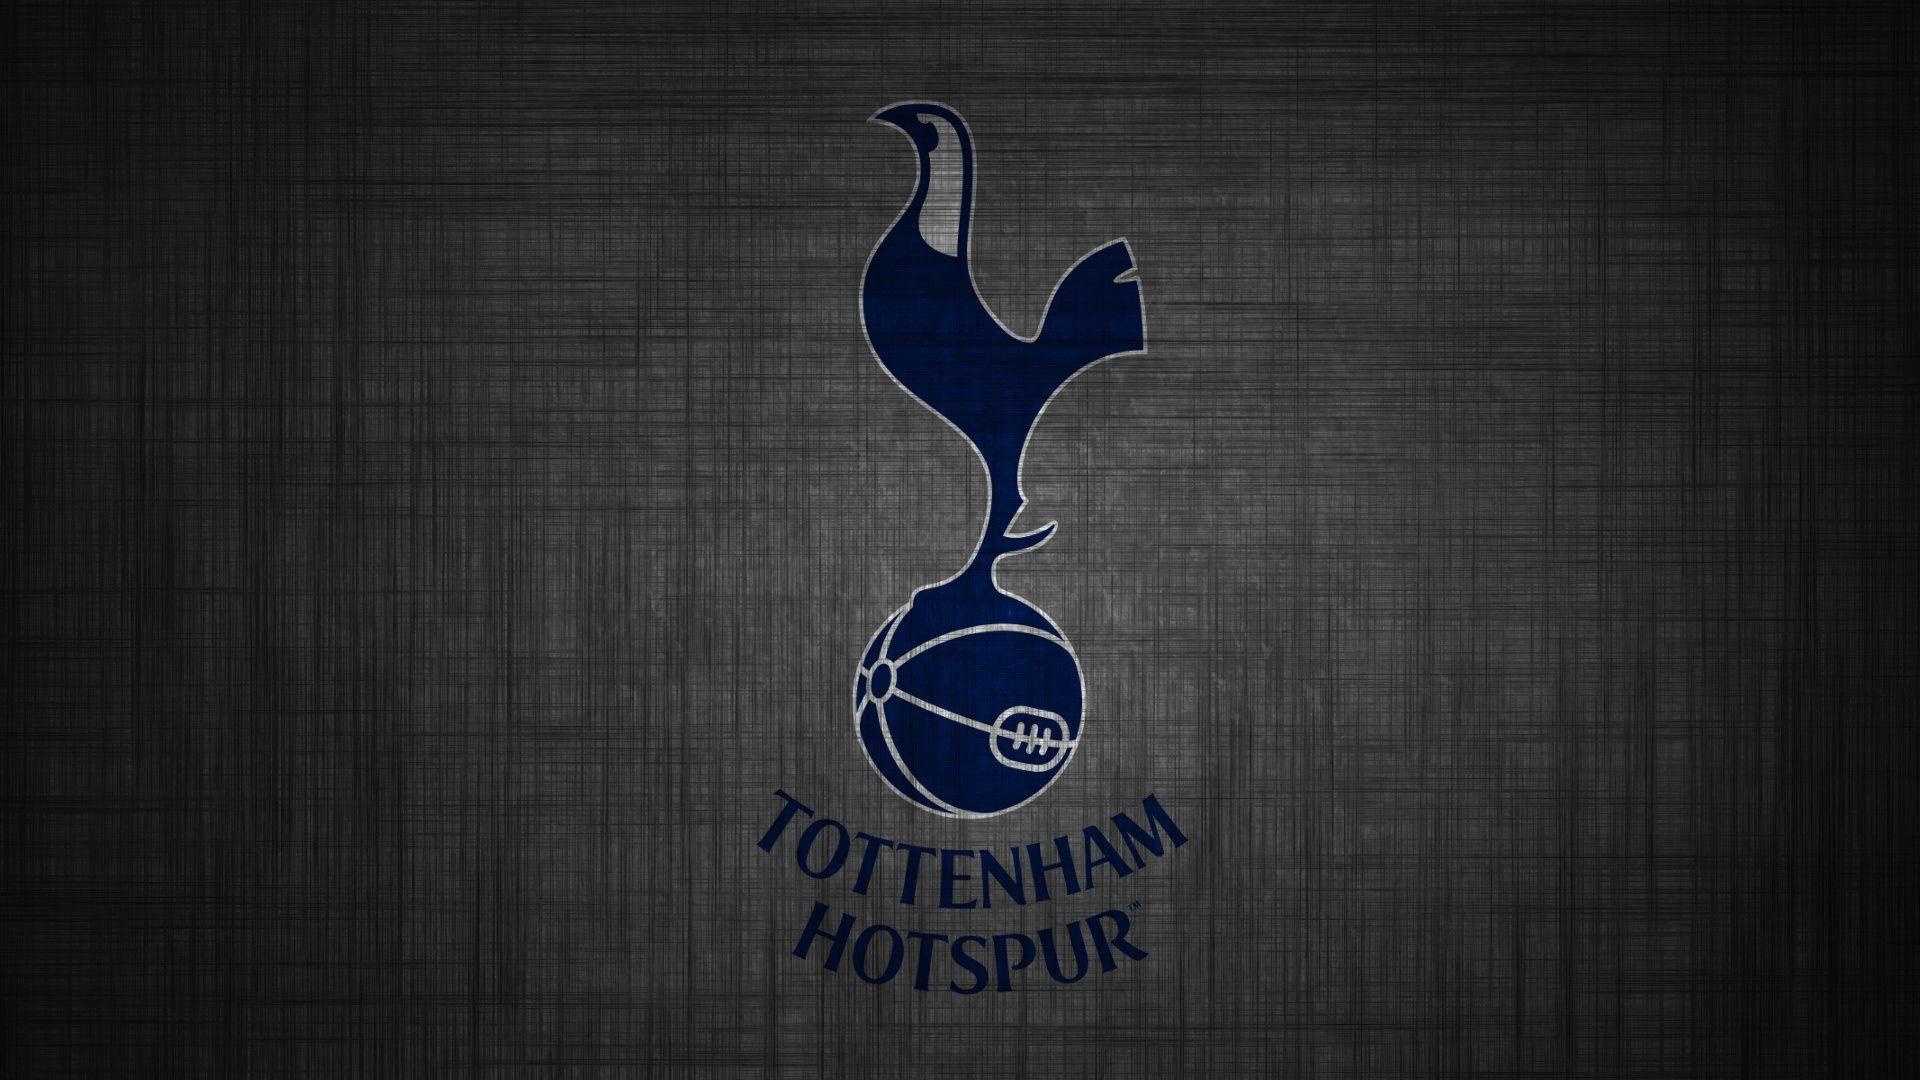 Tottenham Hotspur FC: One of the most successful and reputable English clubs in history. 1920x1080 Full HD Background.